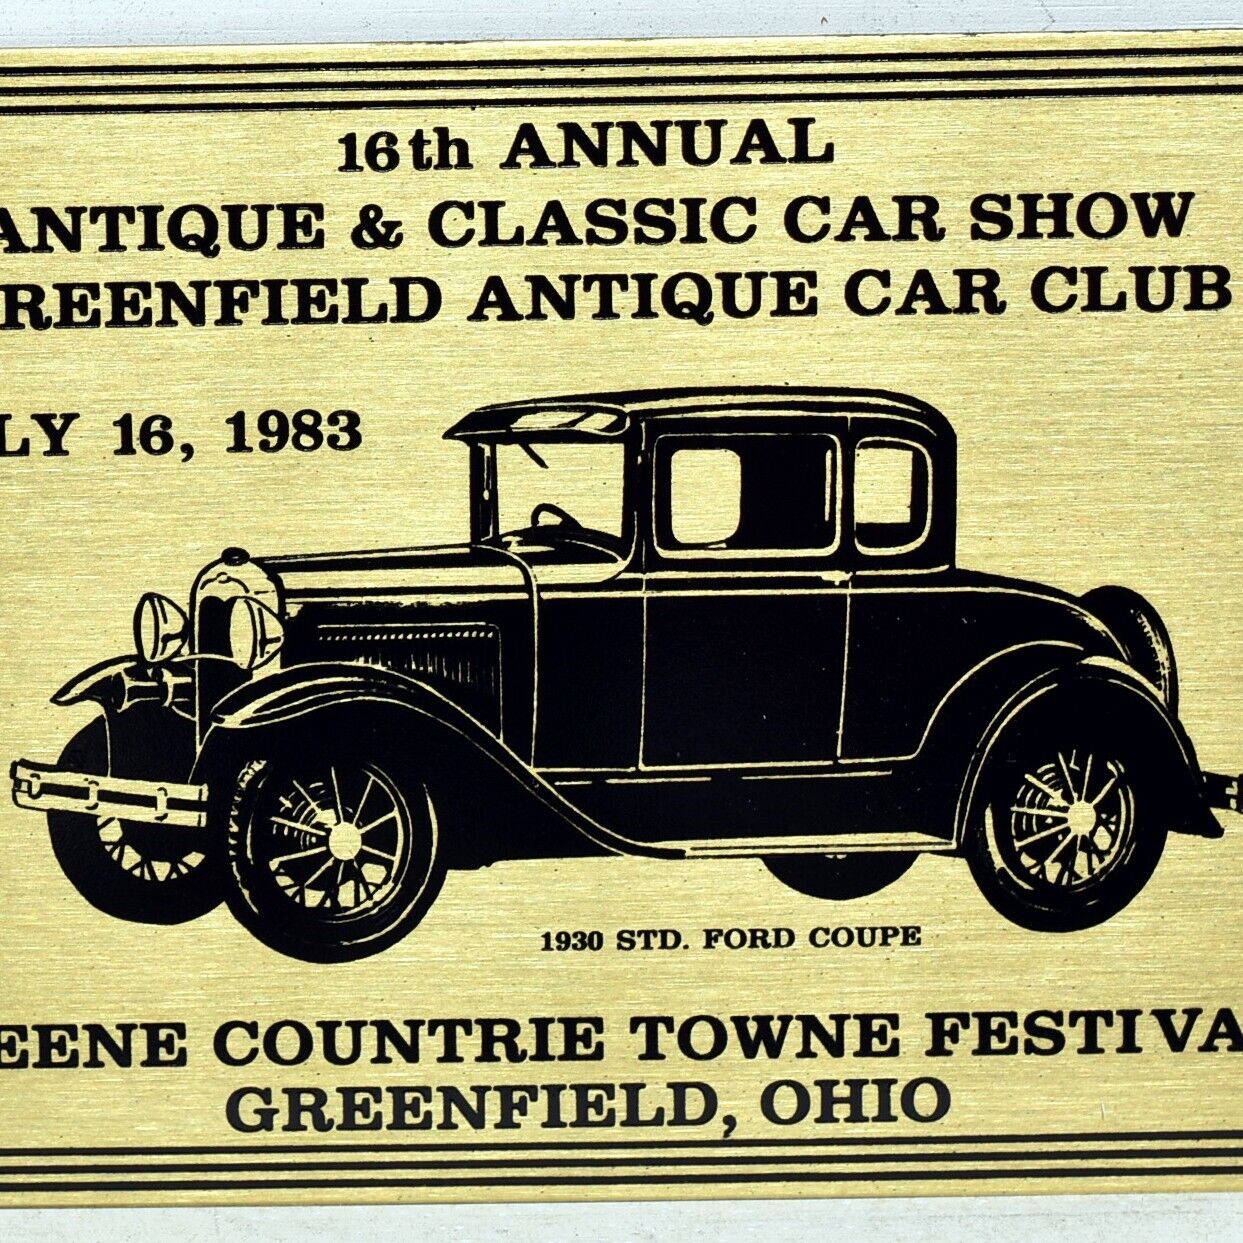 1983 Antique Car Show Club Greene Countrie Towne Festival 1930 Ford Coupe Ohio